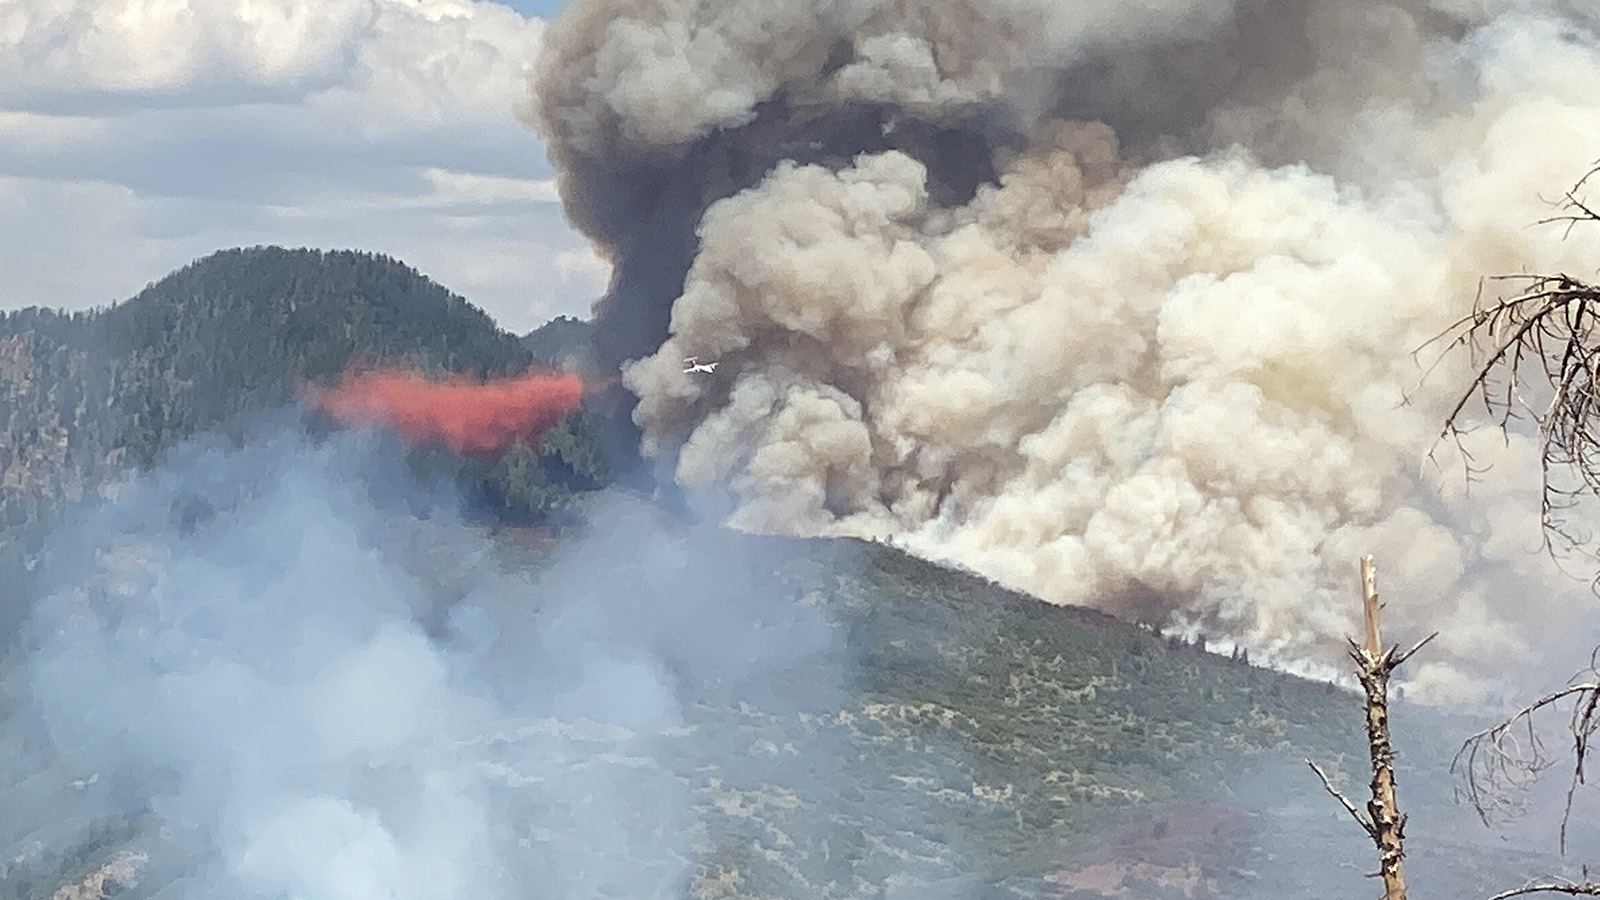 The Grizzly Creek Fire